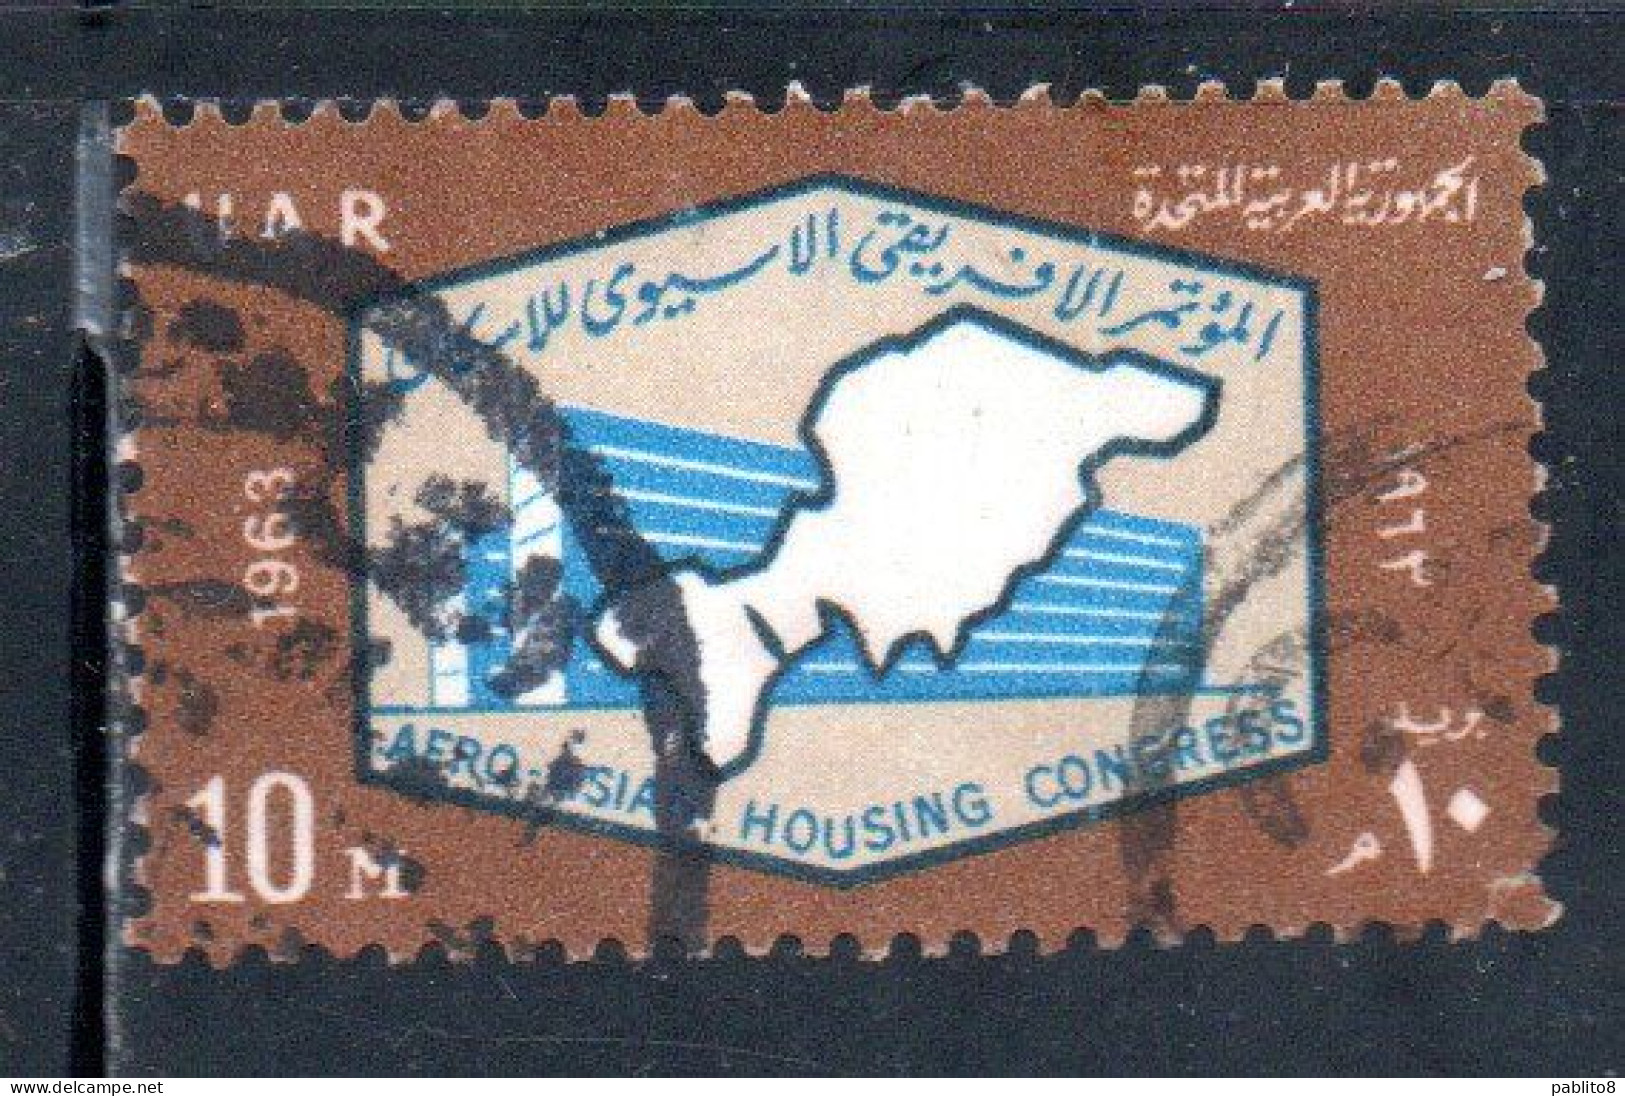 UAR EGYPT EGITTO 1963 AFRO-ASIAN HOUSING CONGRESS MODERN BUILDING AND MAP 10m  USED USATO OBLITERE' - Gebraucht